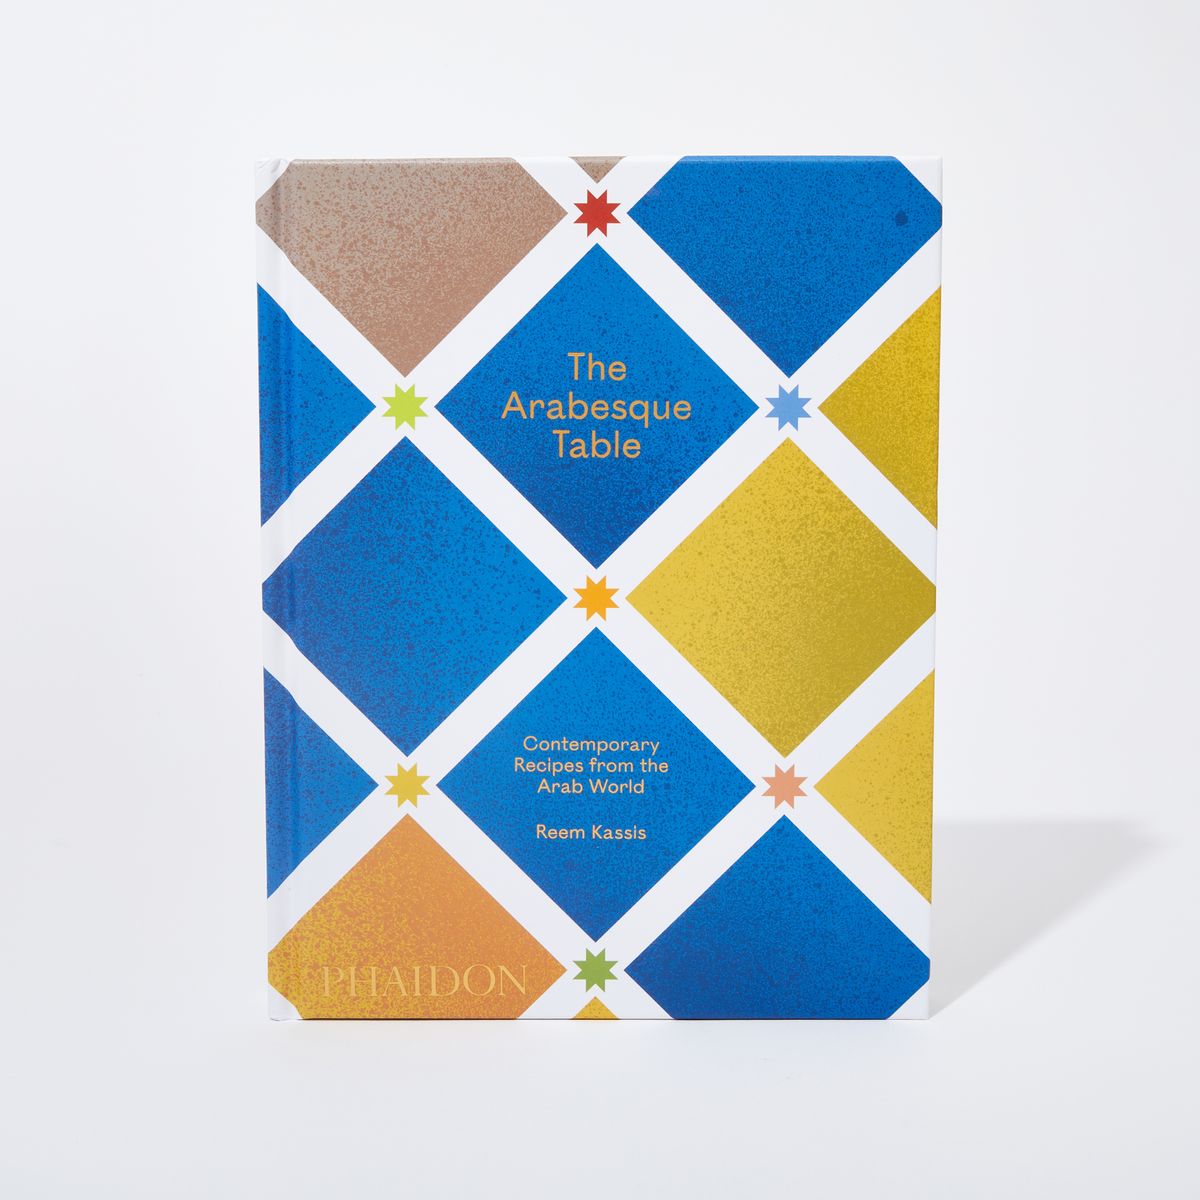 Book cover with a blue and yellow geometric square pattern and the title "The Arabesque Table"